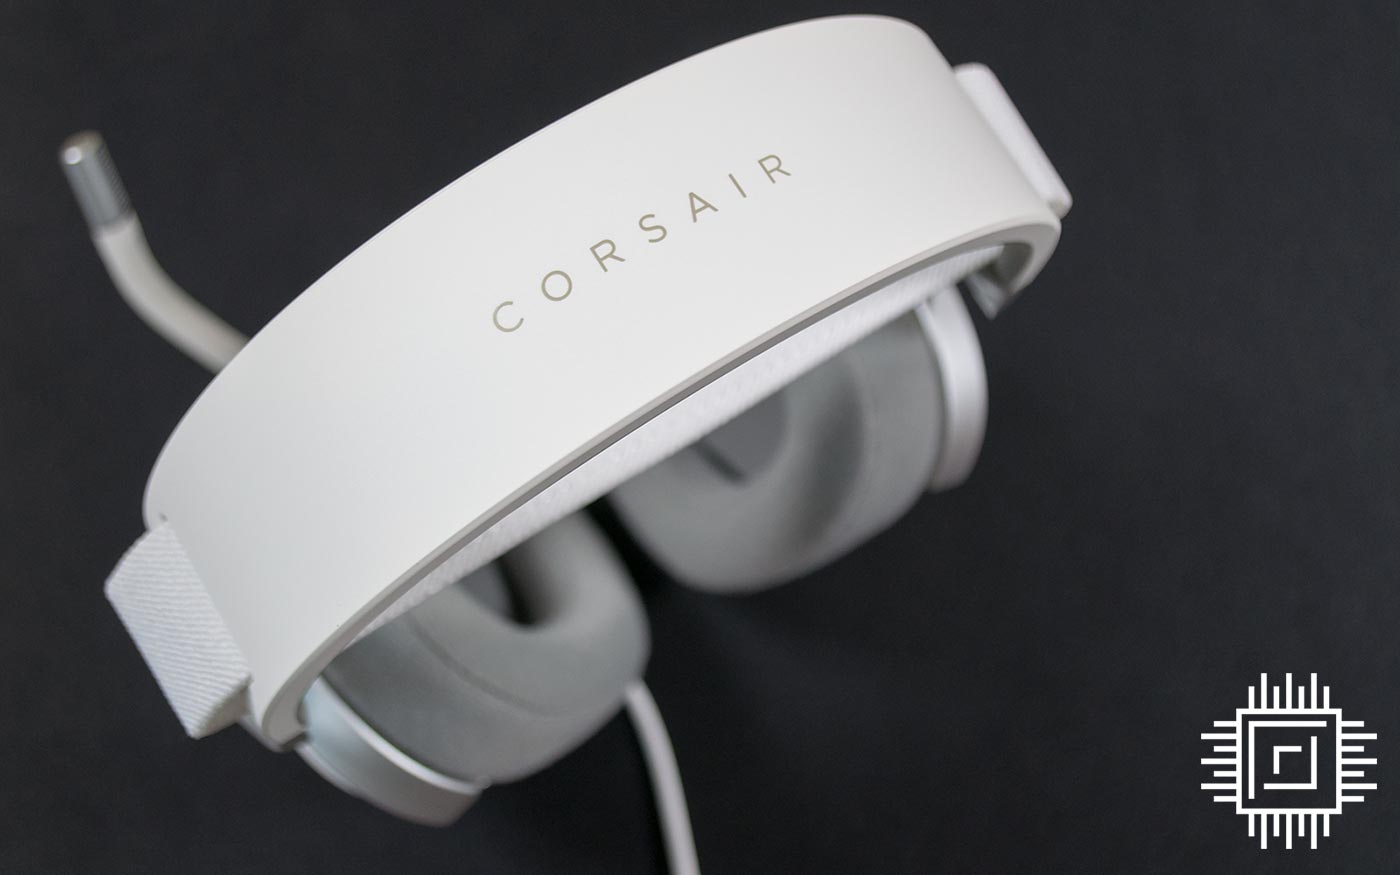 Corroderen bijlage Fruitig Corsair HS80 RGB USB Wired Gaming Headset review: no-nonsense cans | Club386